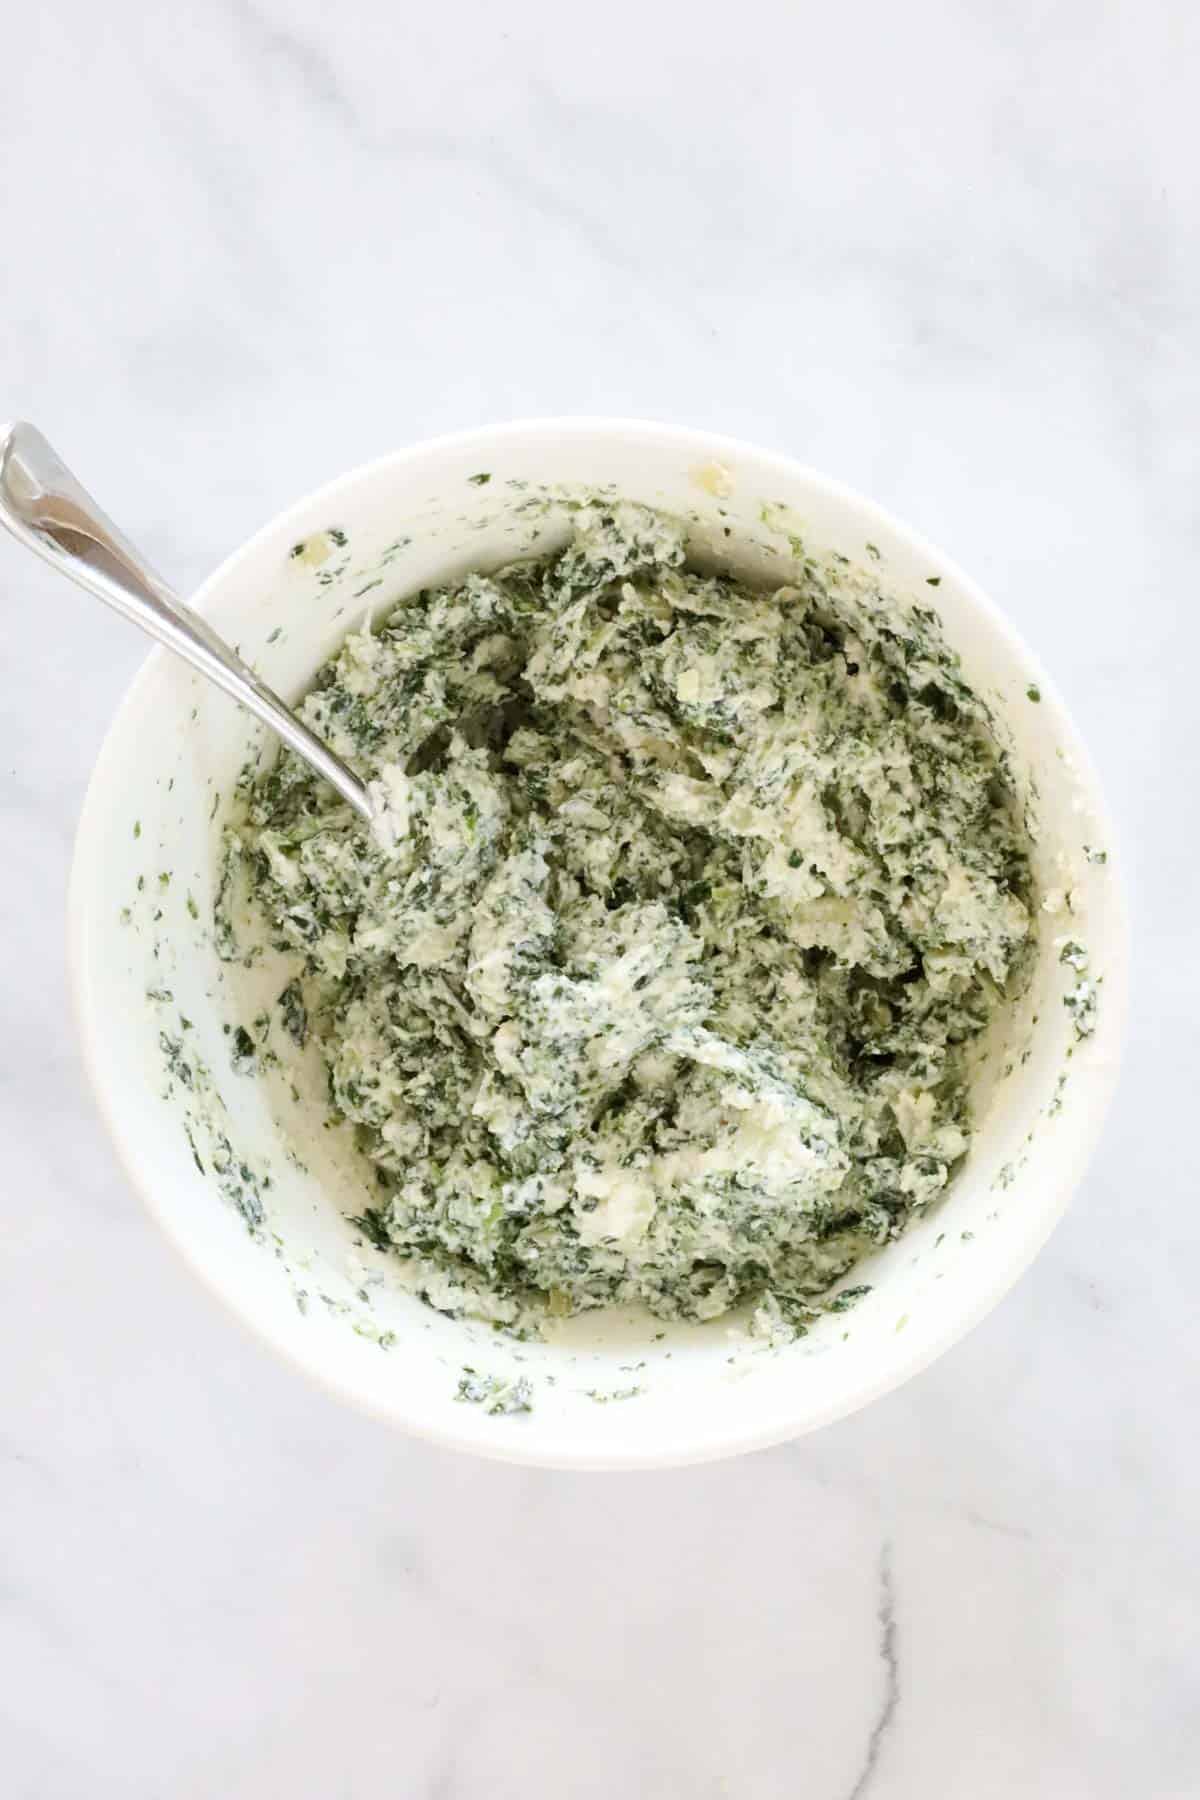 Thawed and drained spinach added to cheeses in a mixing bowl.